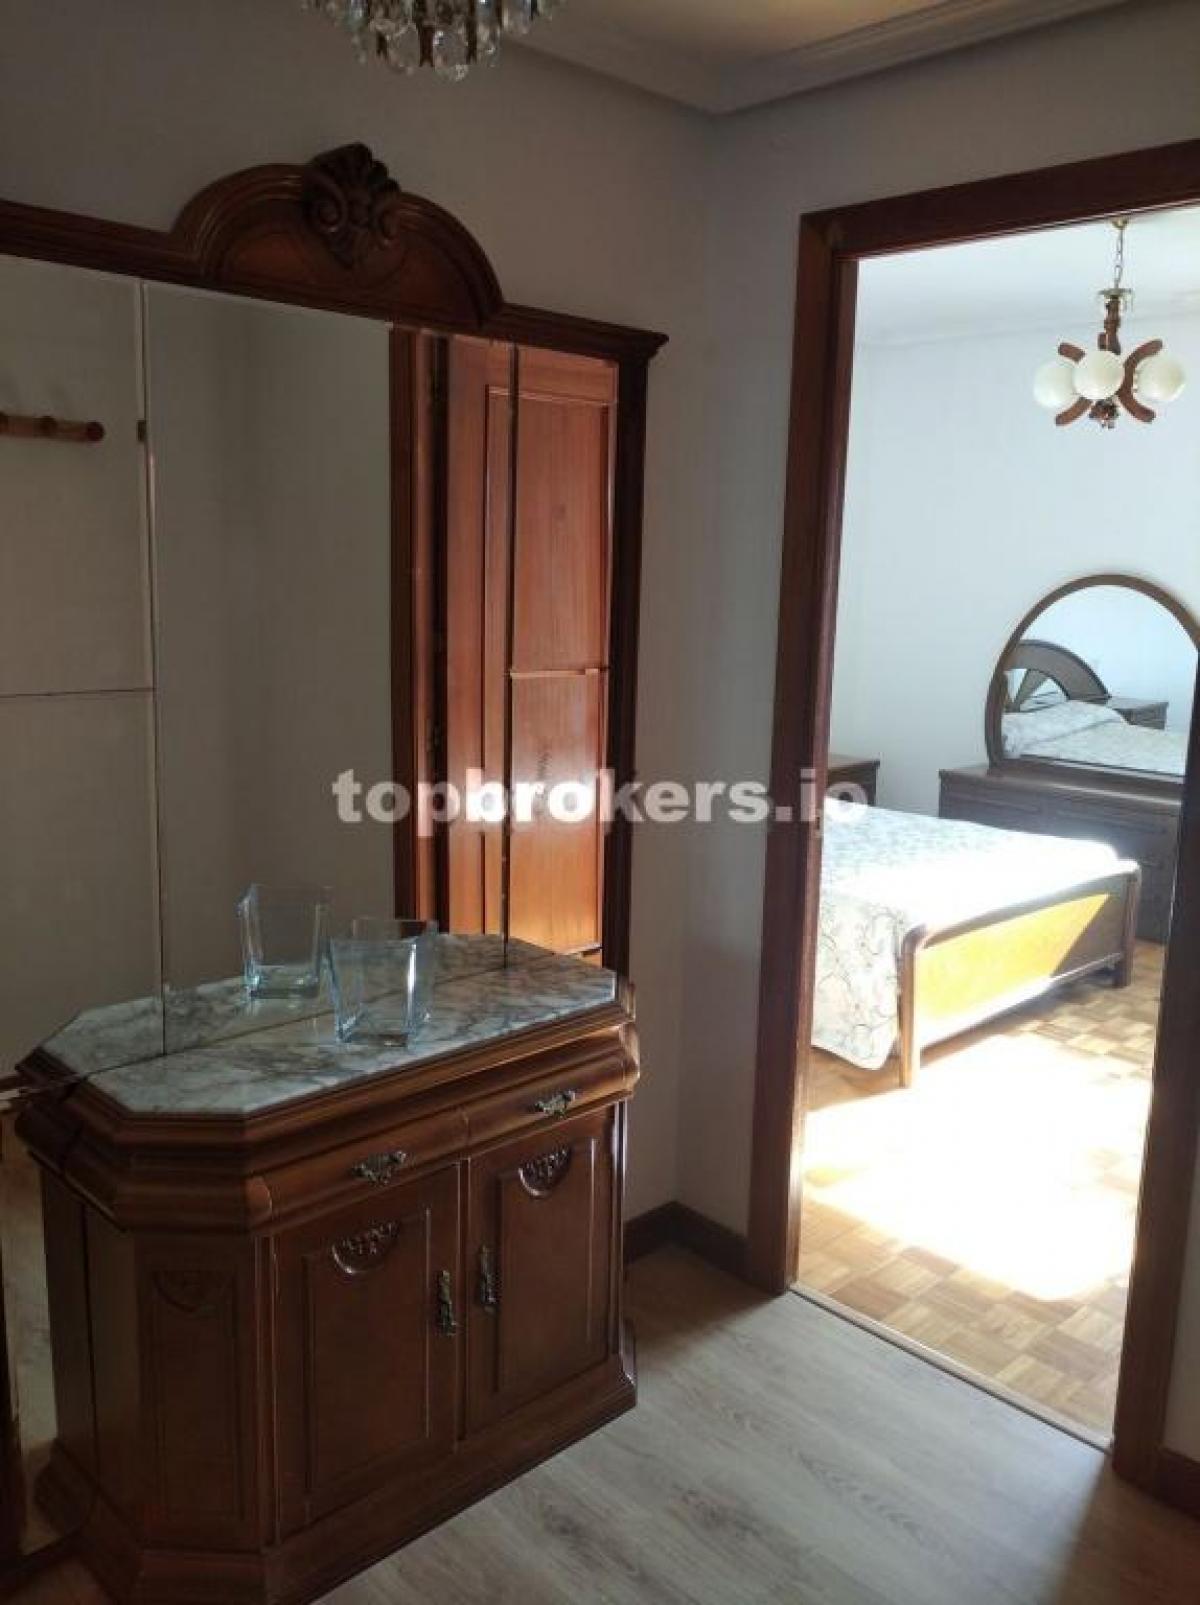 Picture of Apartment For Sale in Salas, Asturias, Spain